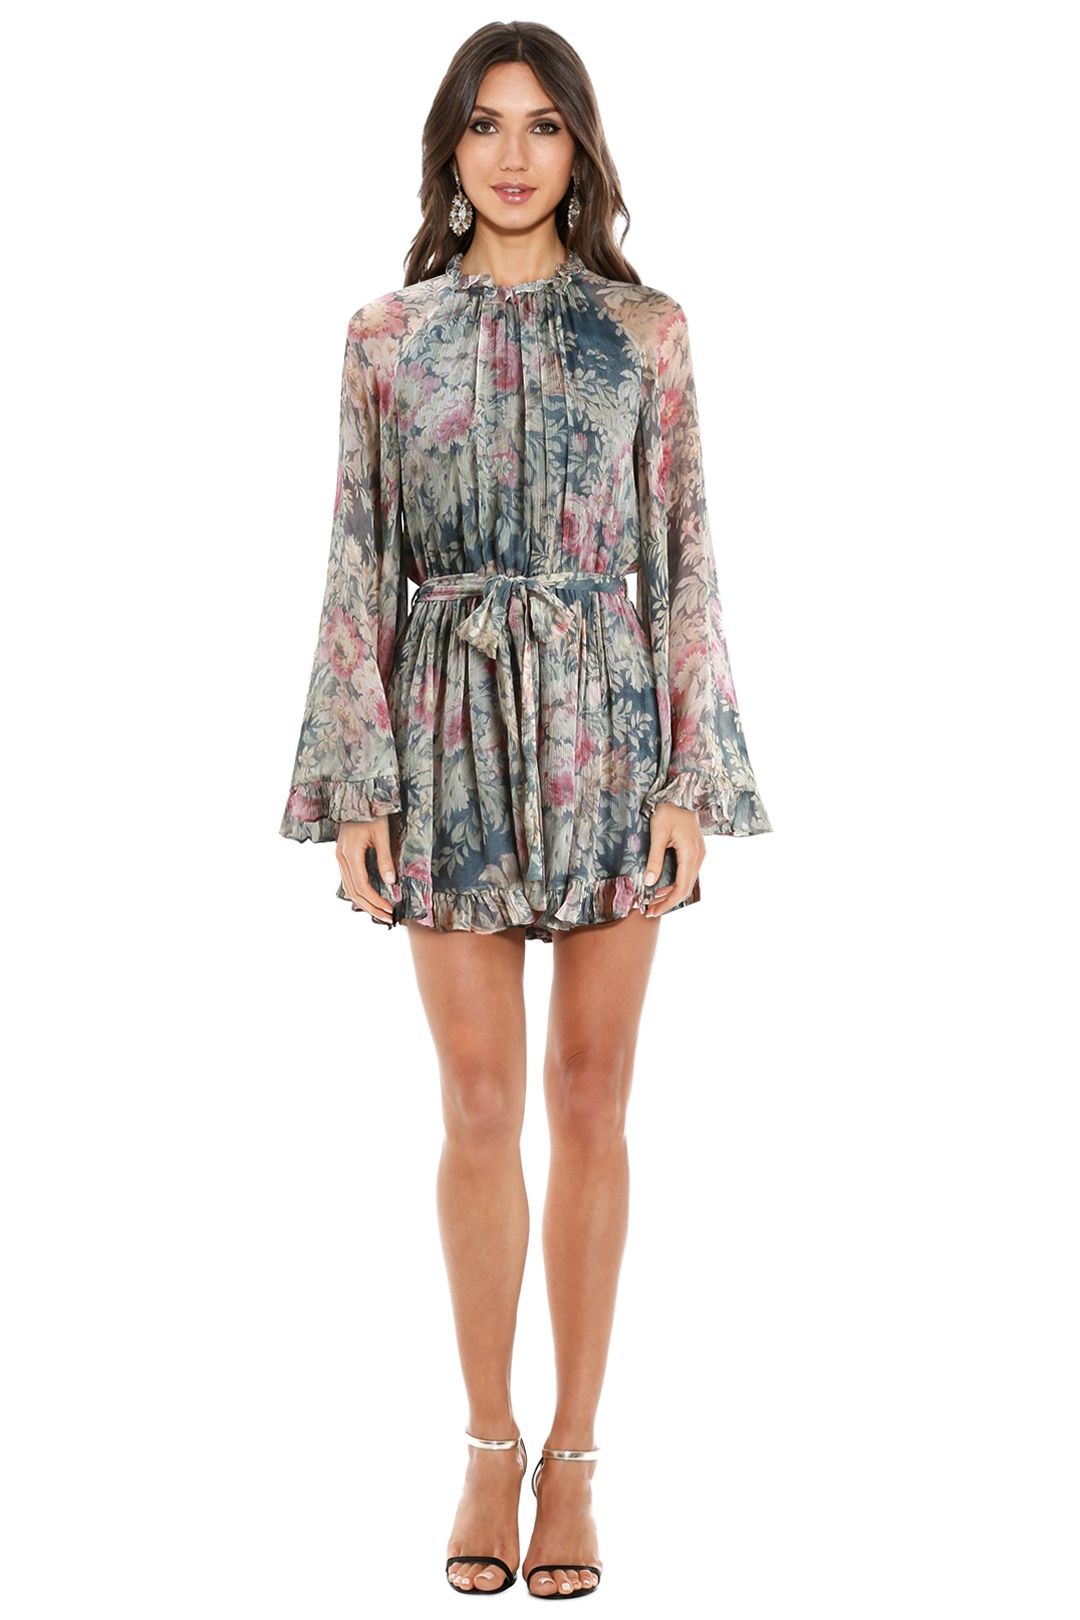 Zimmermann - Cavalier Playsuit - Smoke Floral - Front